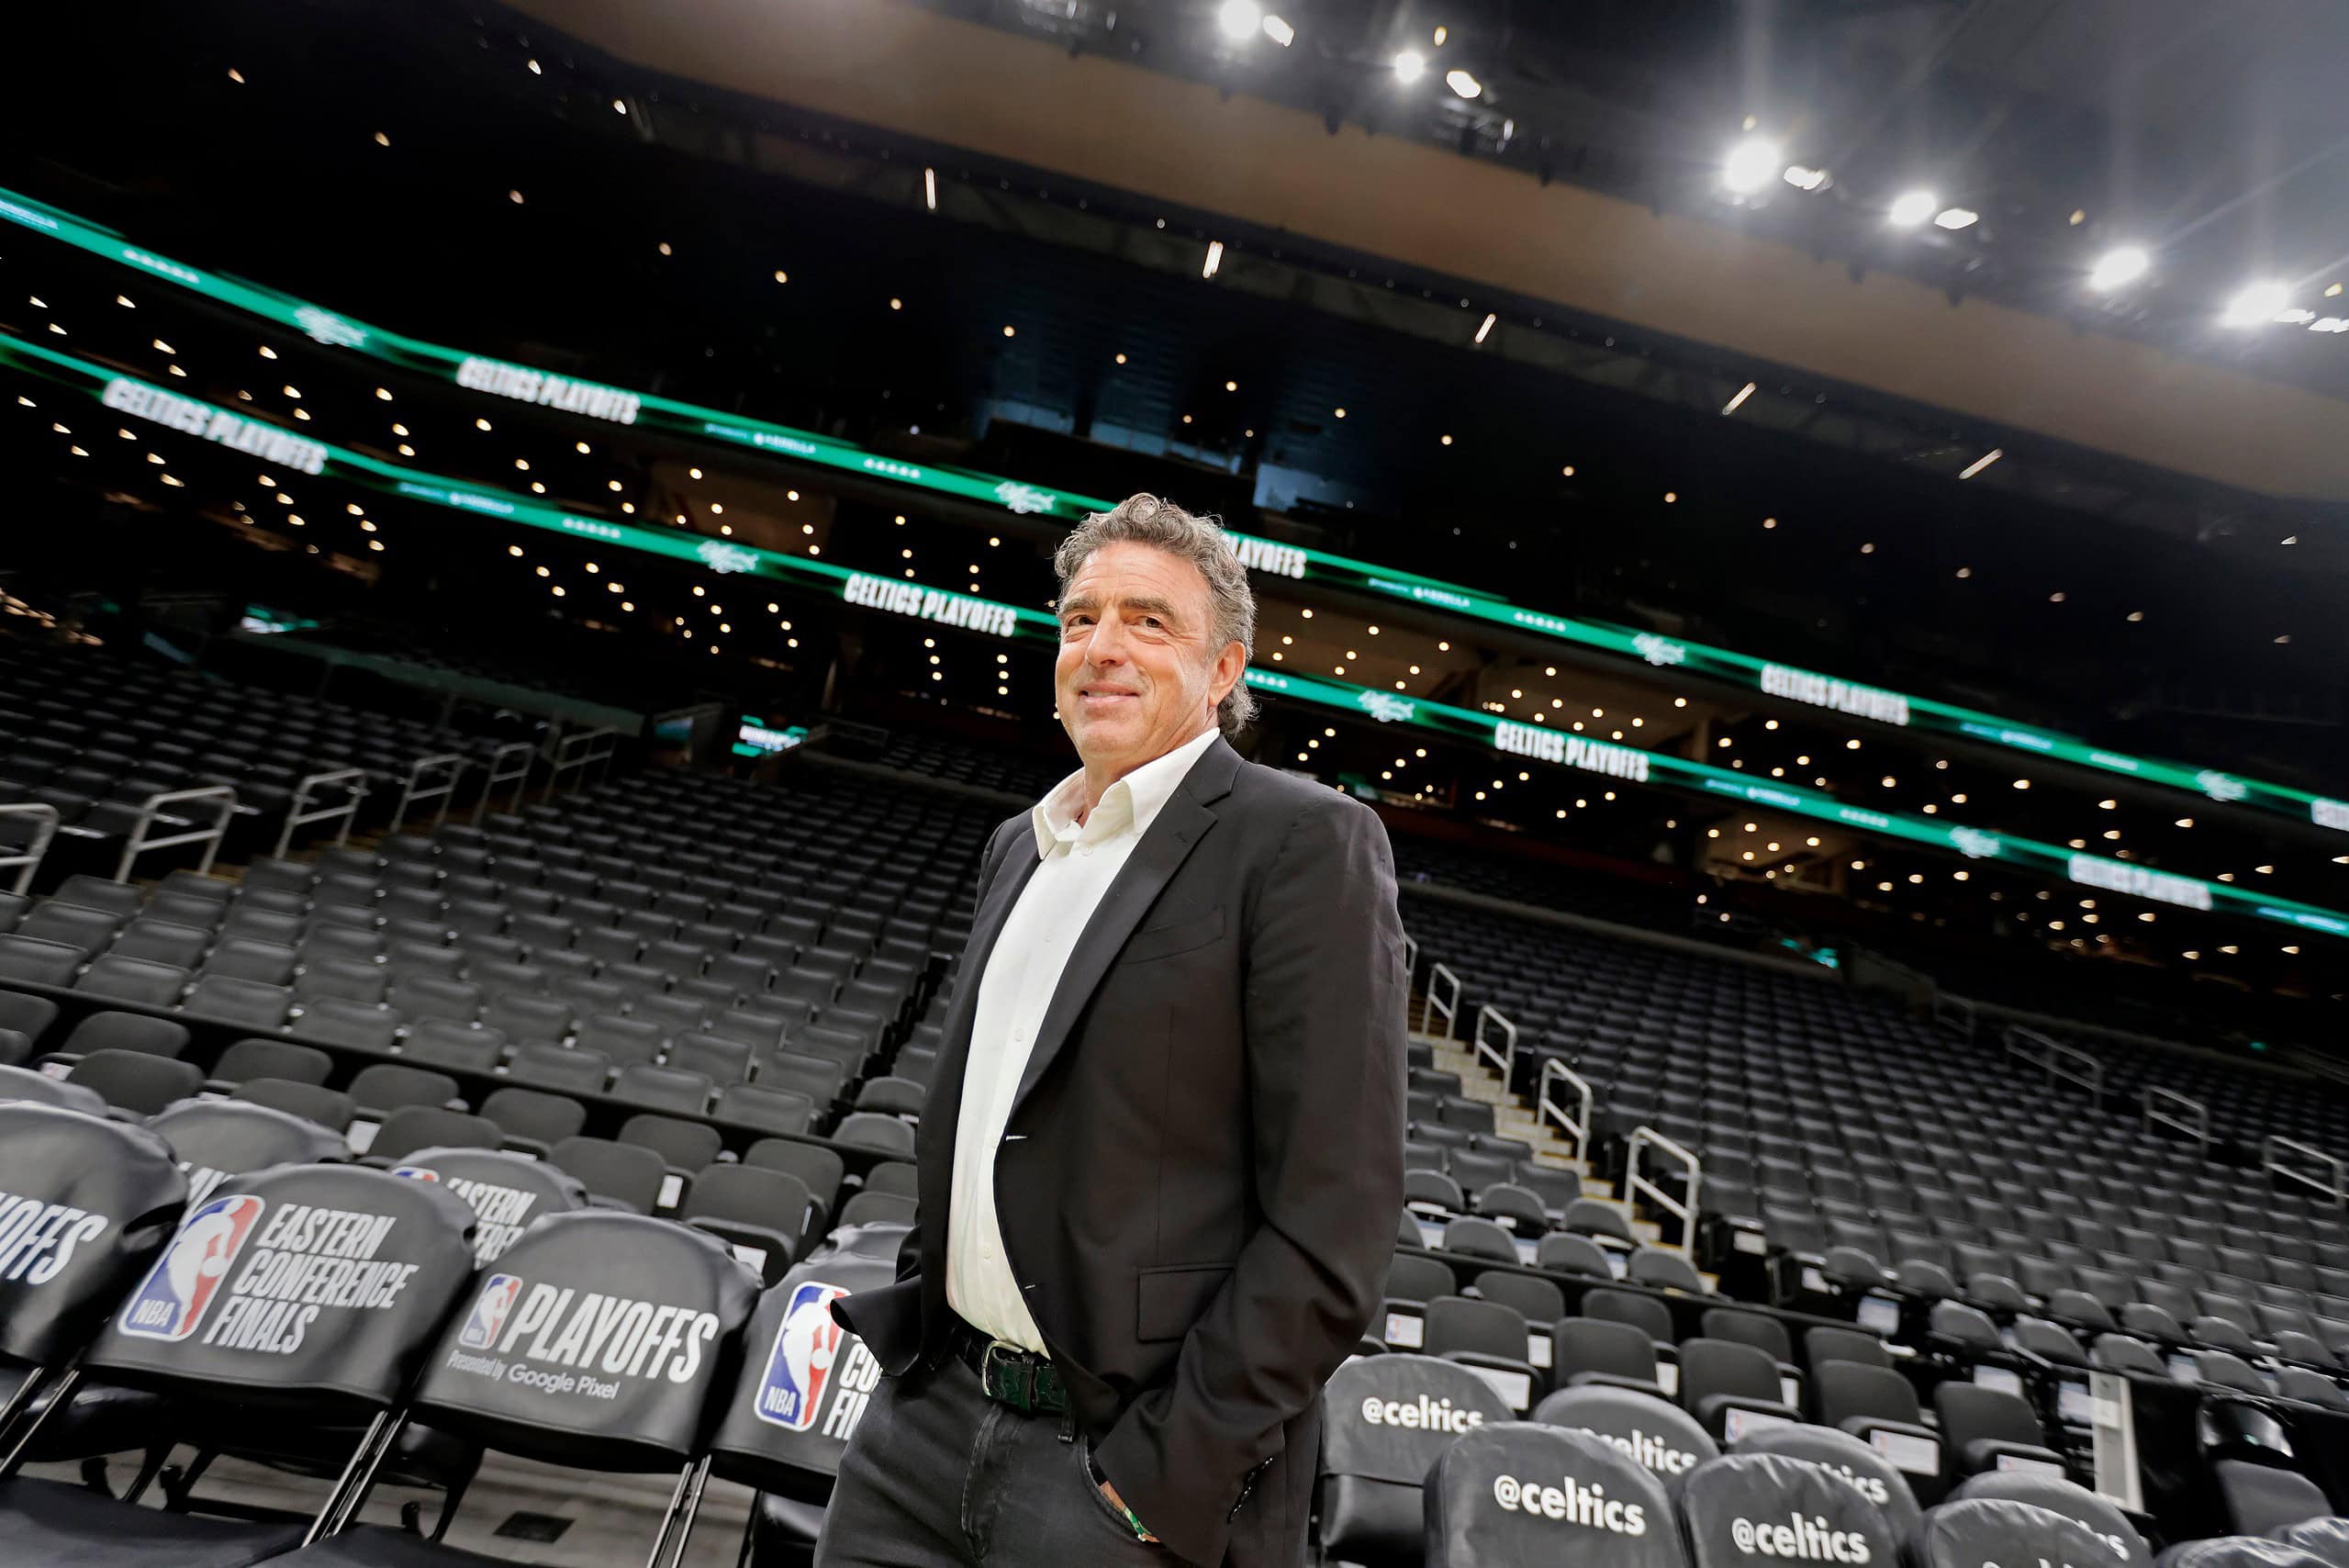 Boston Celtics Ownership Planning to Sell Team Sparks Concerns Over Potential Buyer